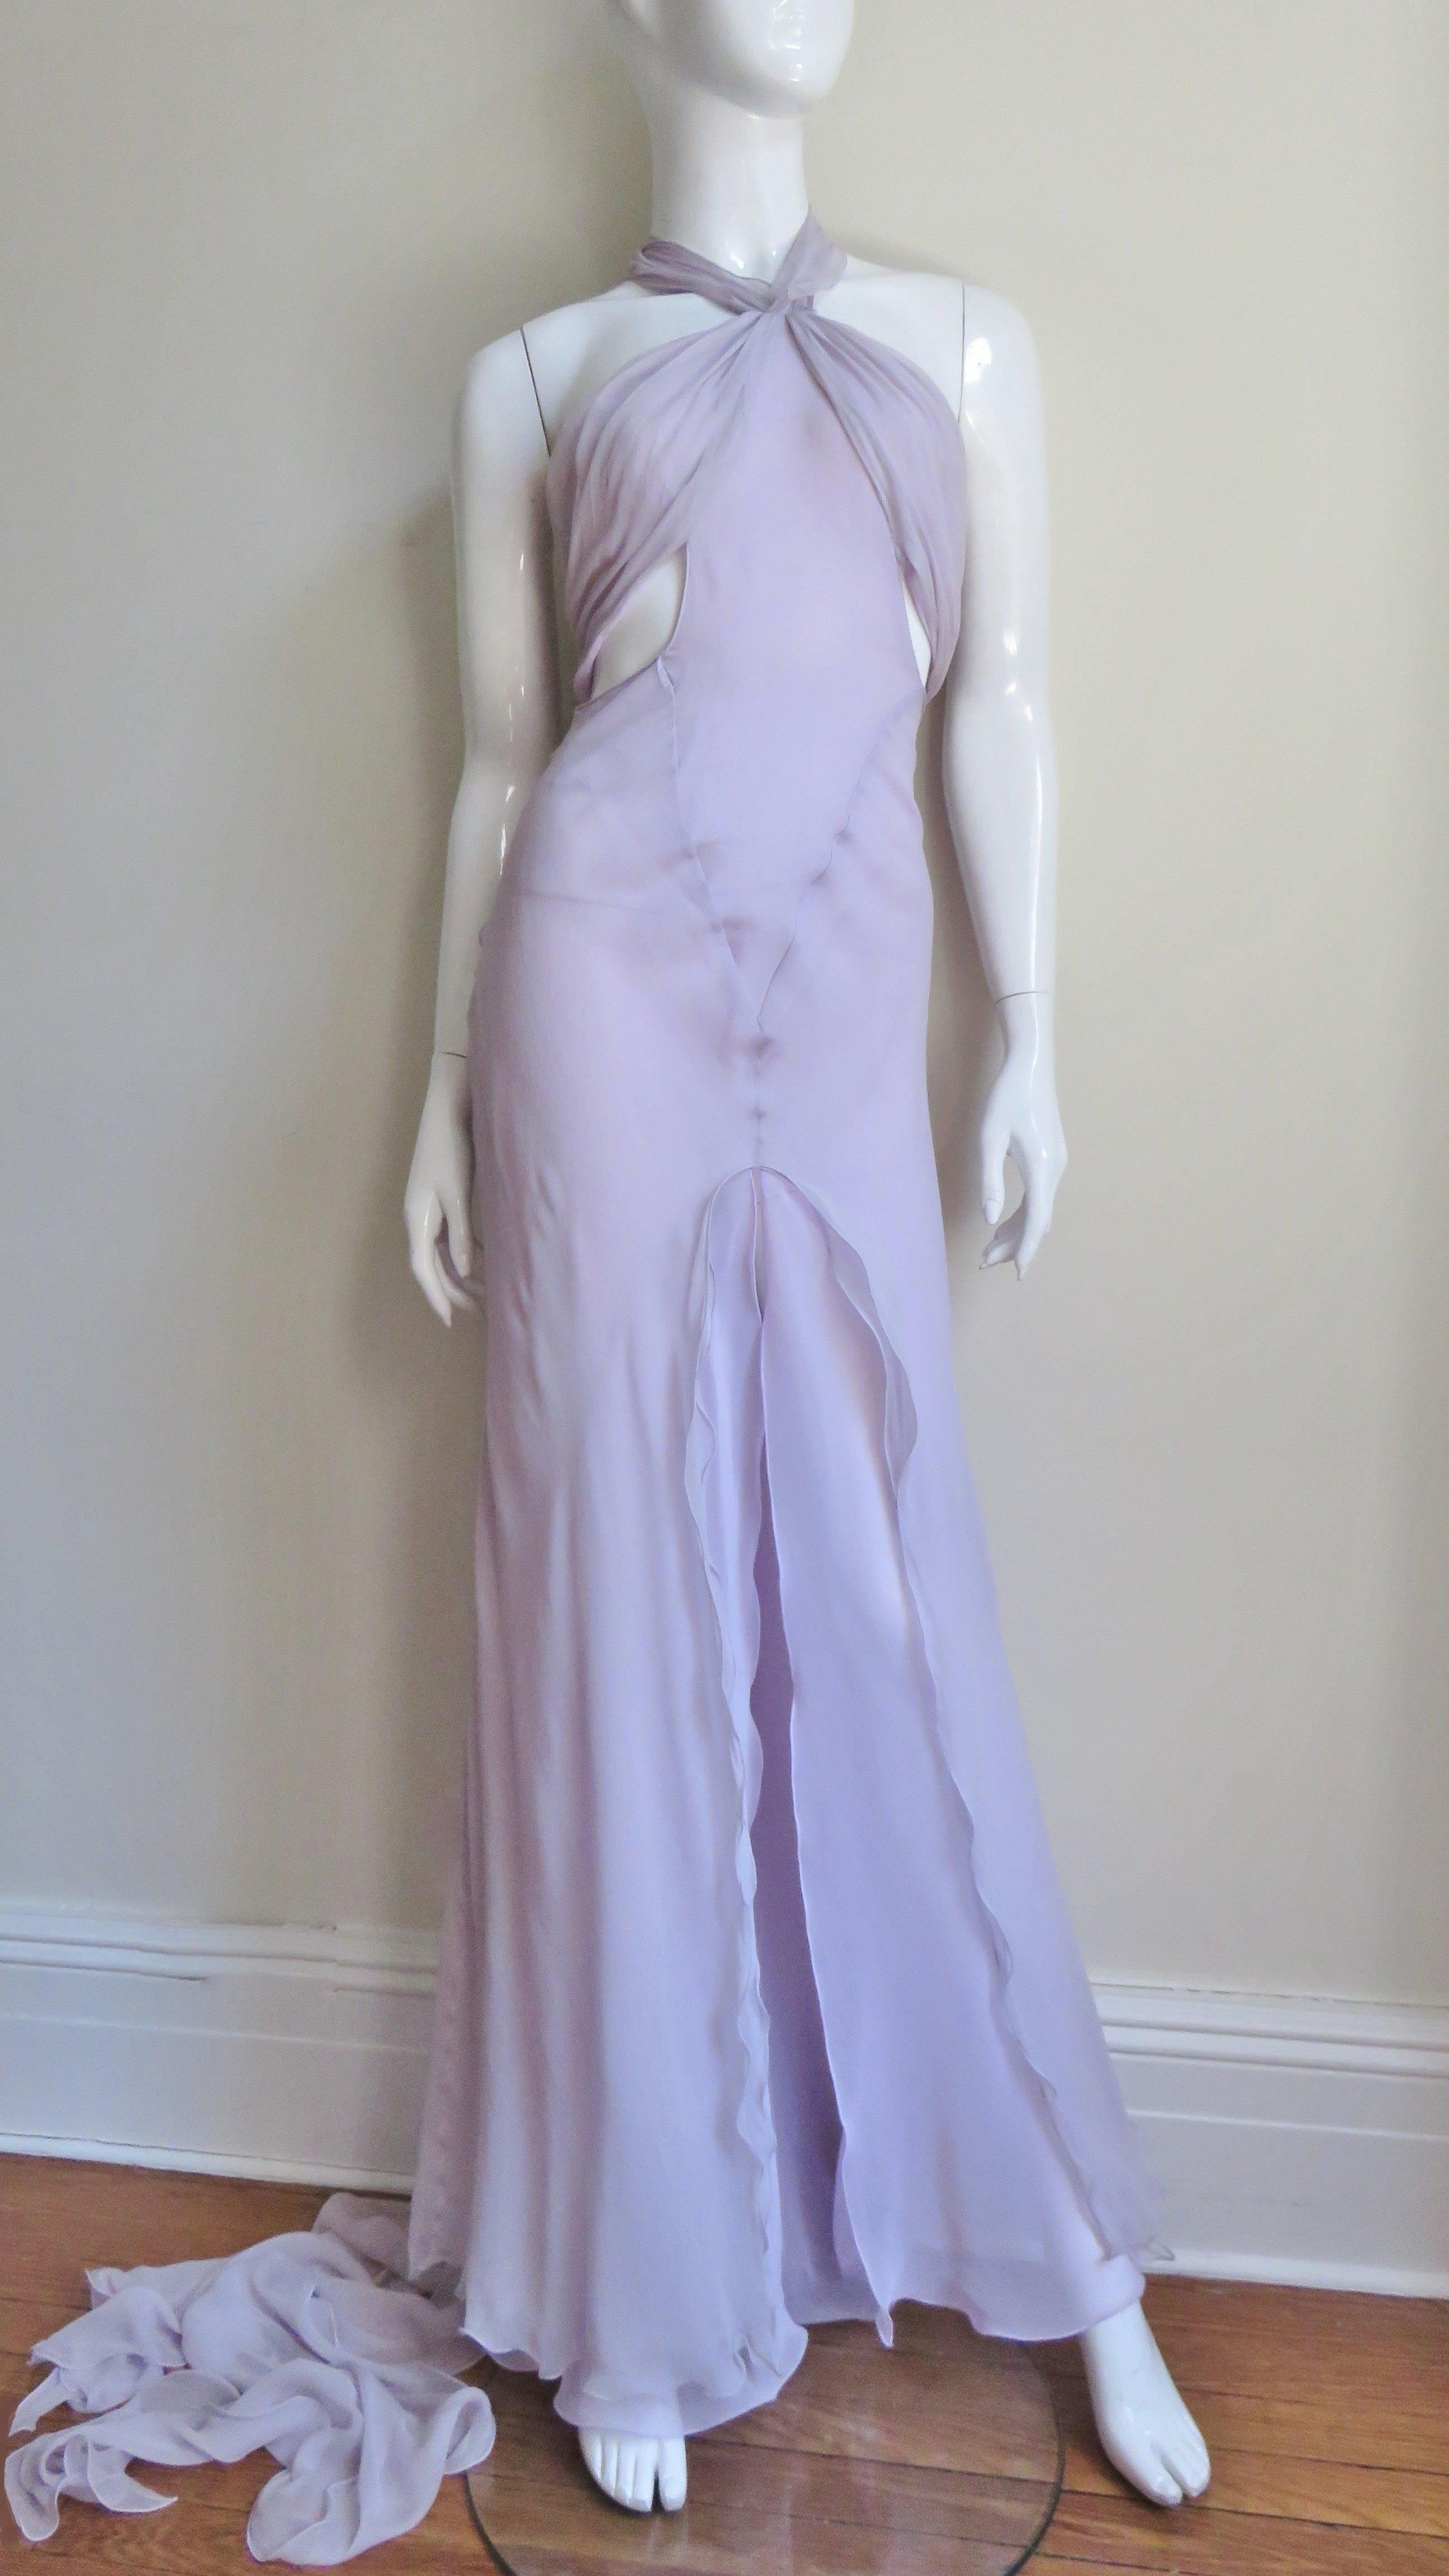 A gorgeous ethereal gown from Krizia made of layers of semi sheer lavender silk.  A floating dream on the runway it has spaghetti straps with a ruched panel across the bust and 2 draping panels exposing the side waist.  Layers of silk form the skirt